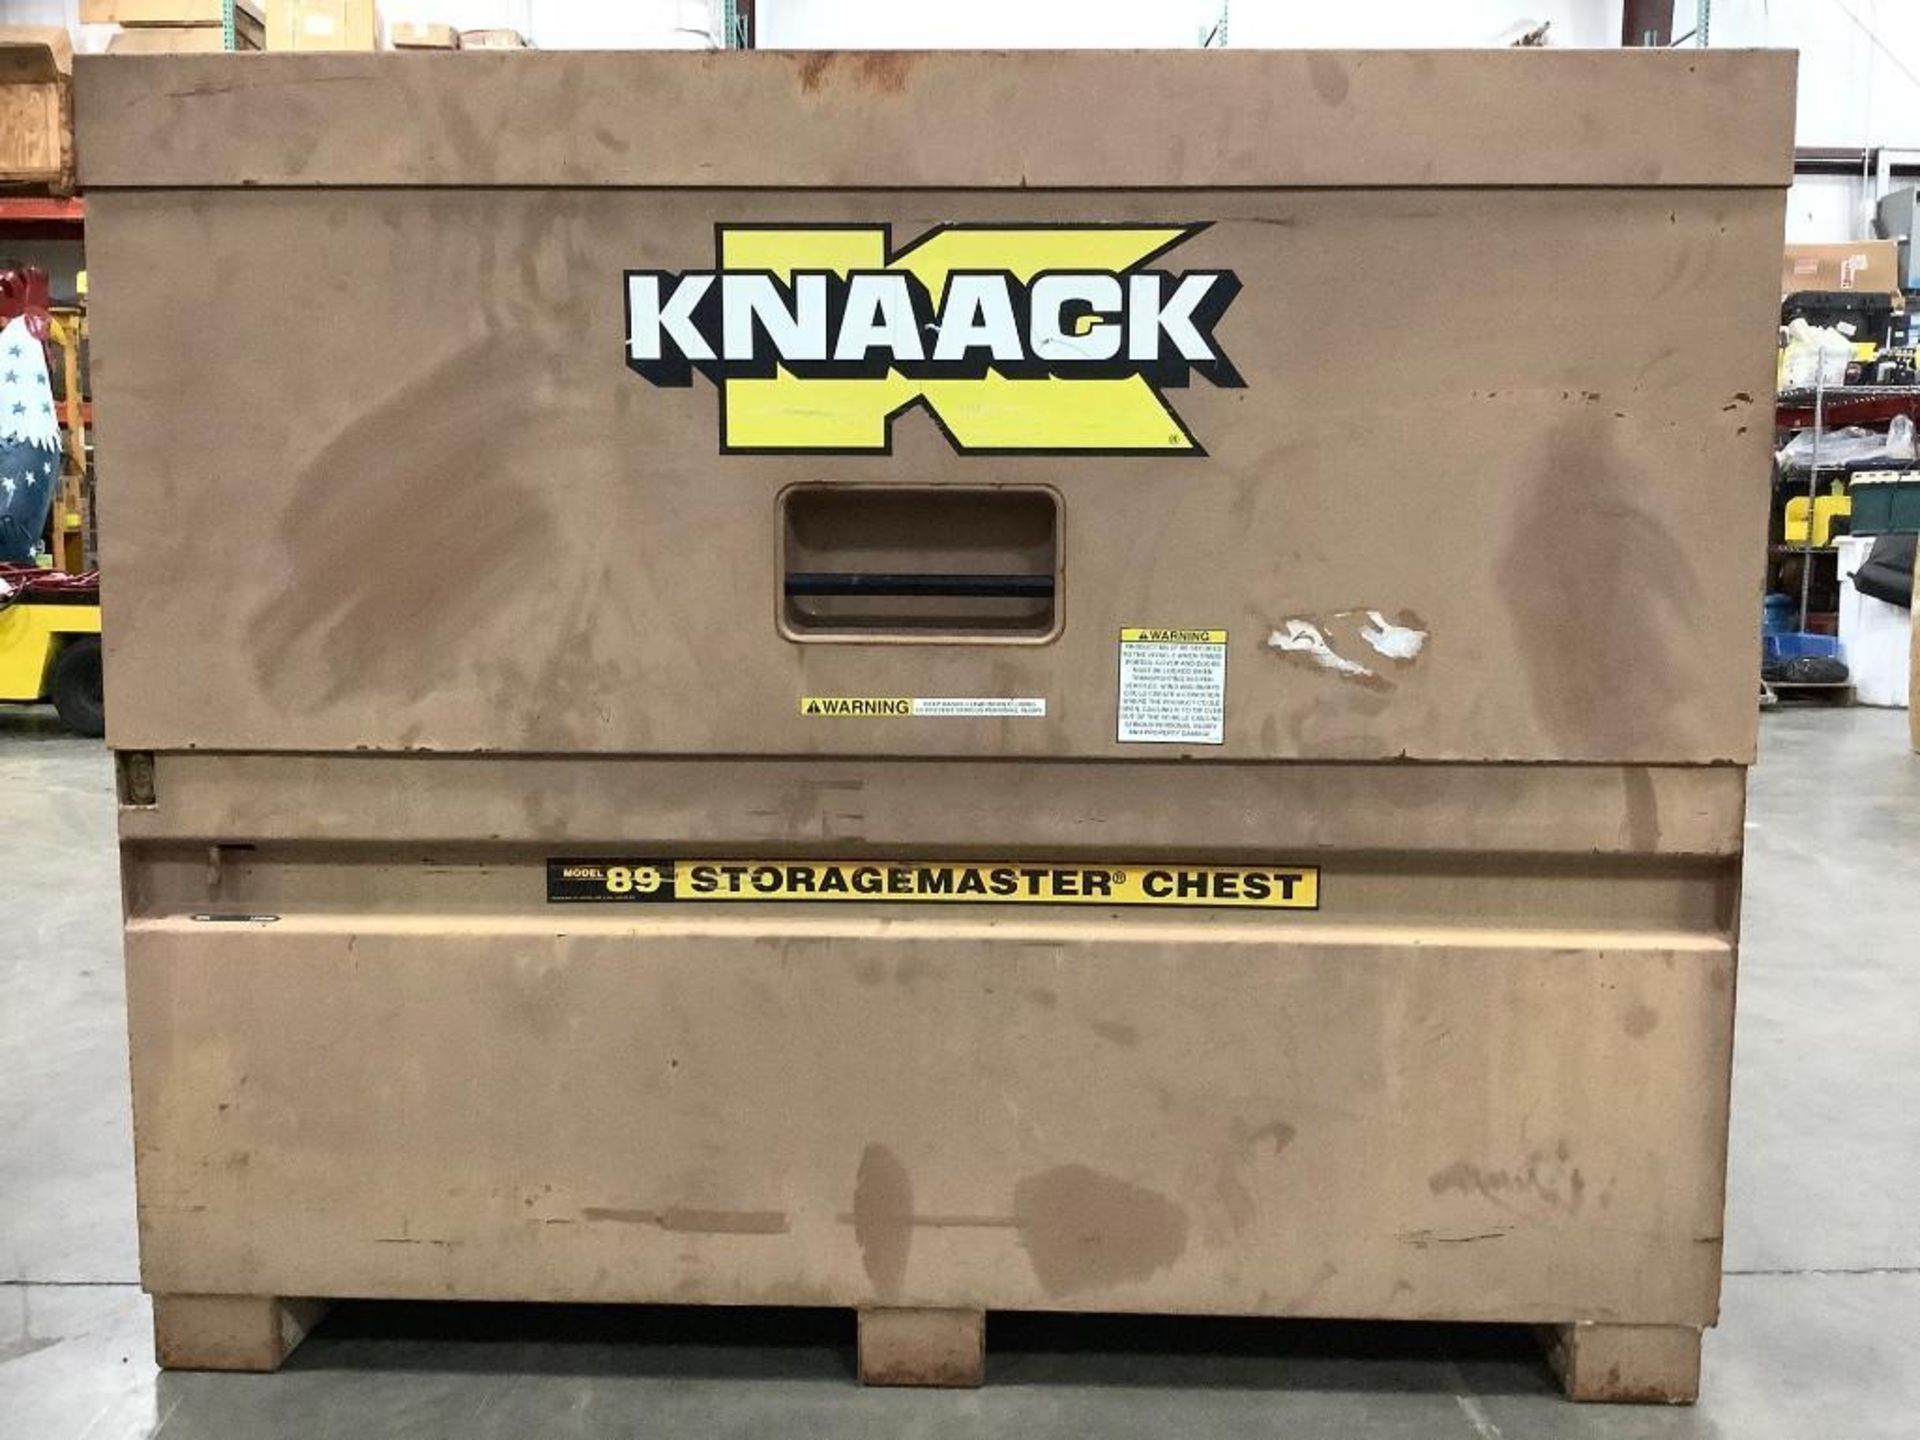 KNAACK STORAGEMASTER CHEST MODEL 89 WITH CONTENTS, APPROX 50IN TALL x 60IN LONG x 30IN WIDE - Image 2 of 10